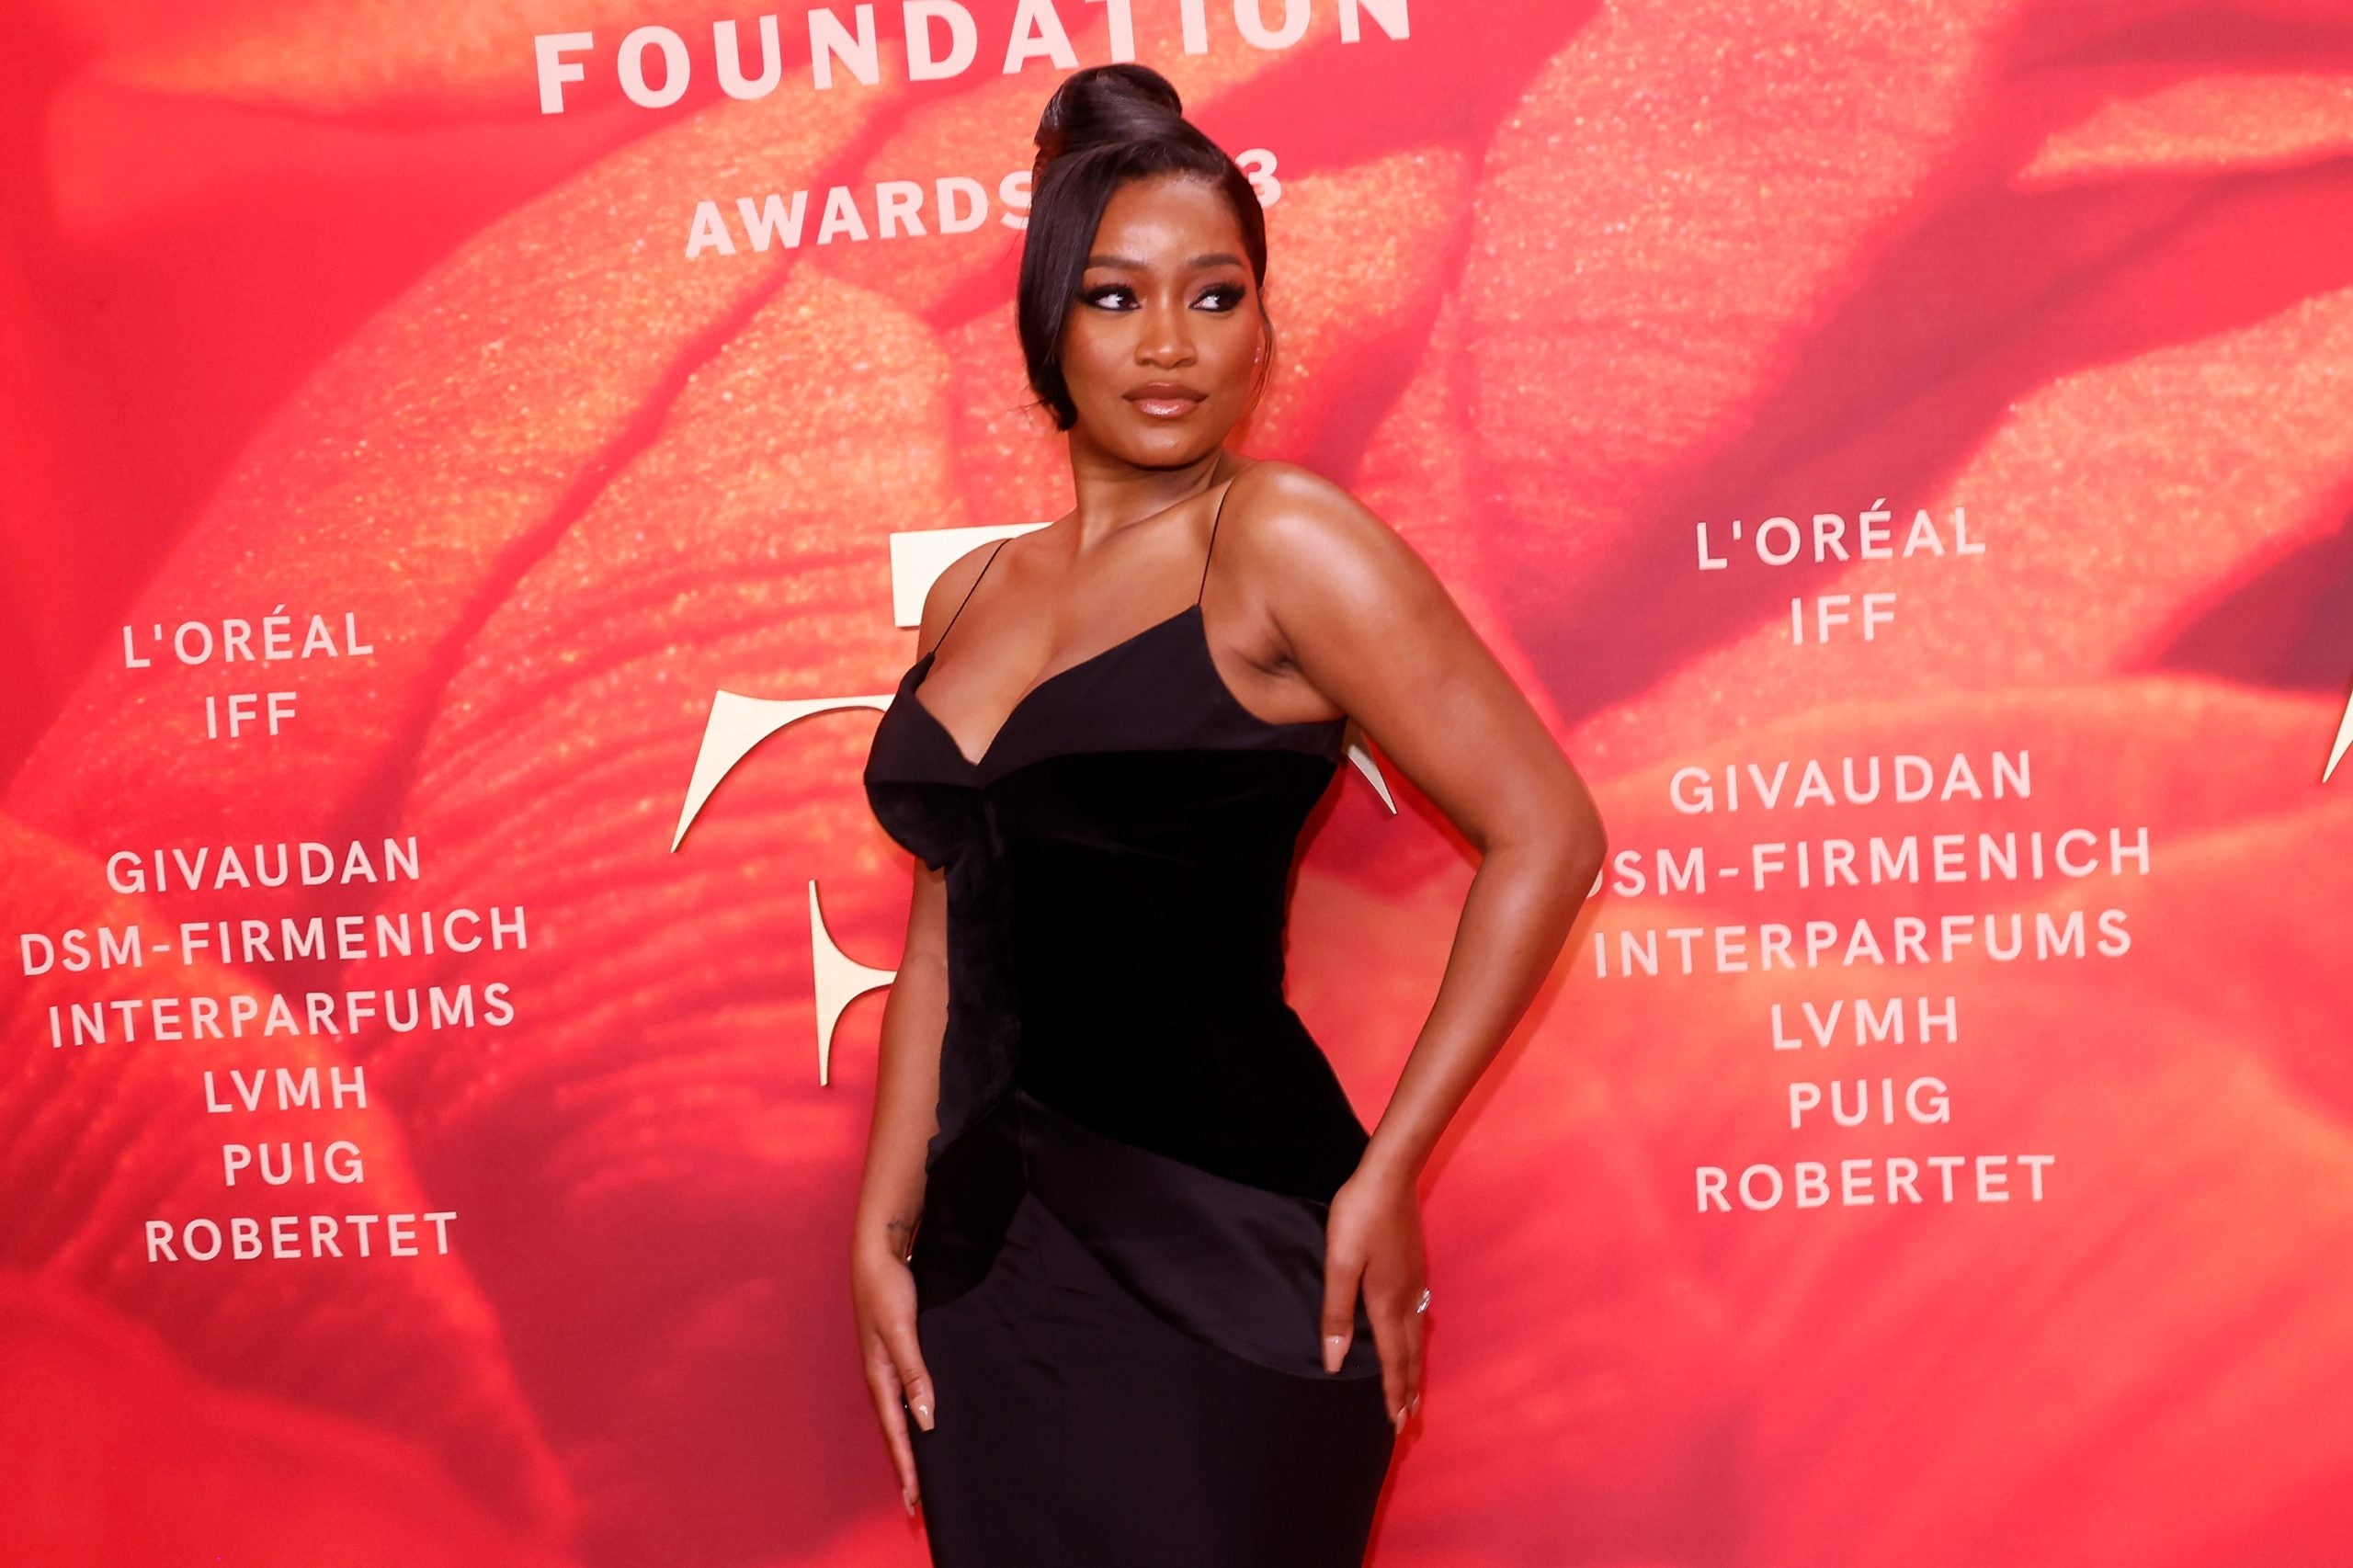 Keke Palmer On Loving Her New Body After Baby: ‘I’ve Gotten So Much More Powerful’